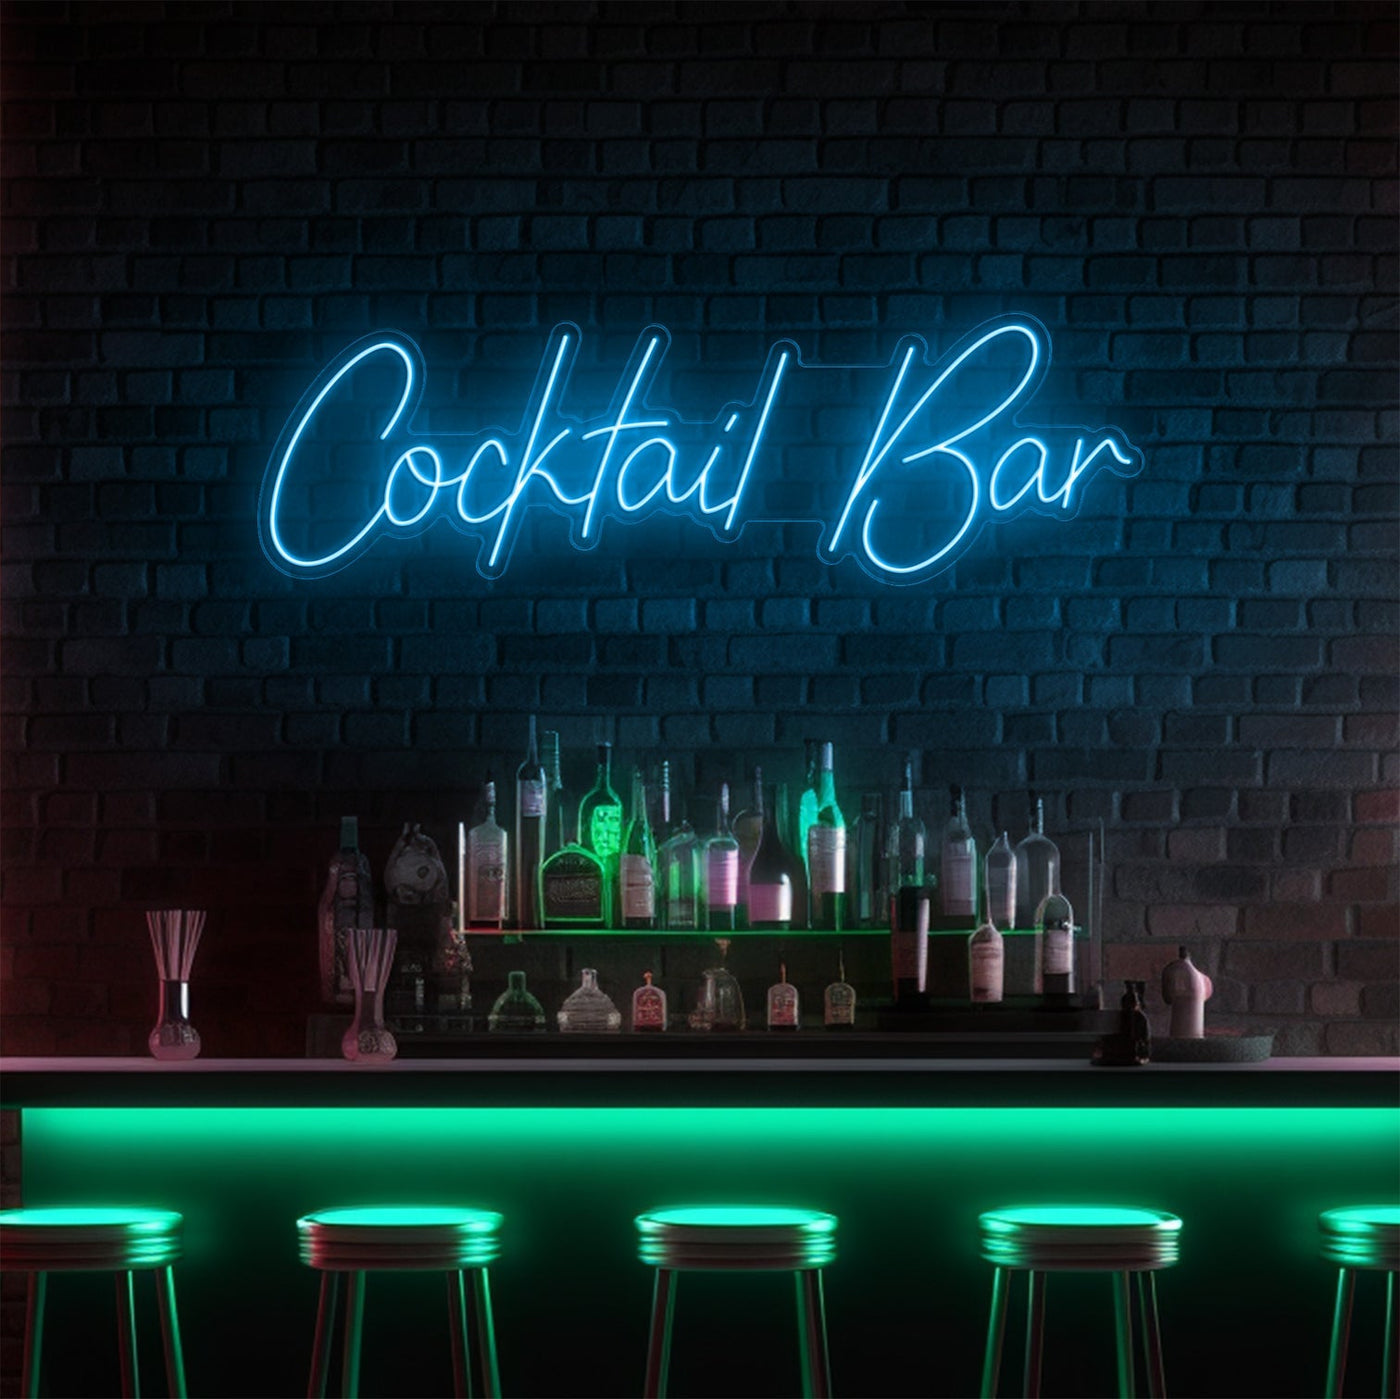 Cocktail Bar LED Neon Sign - 40 InchIce Blue